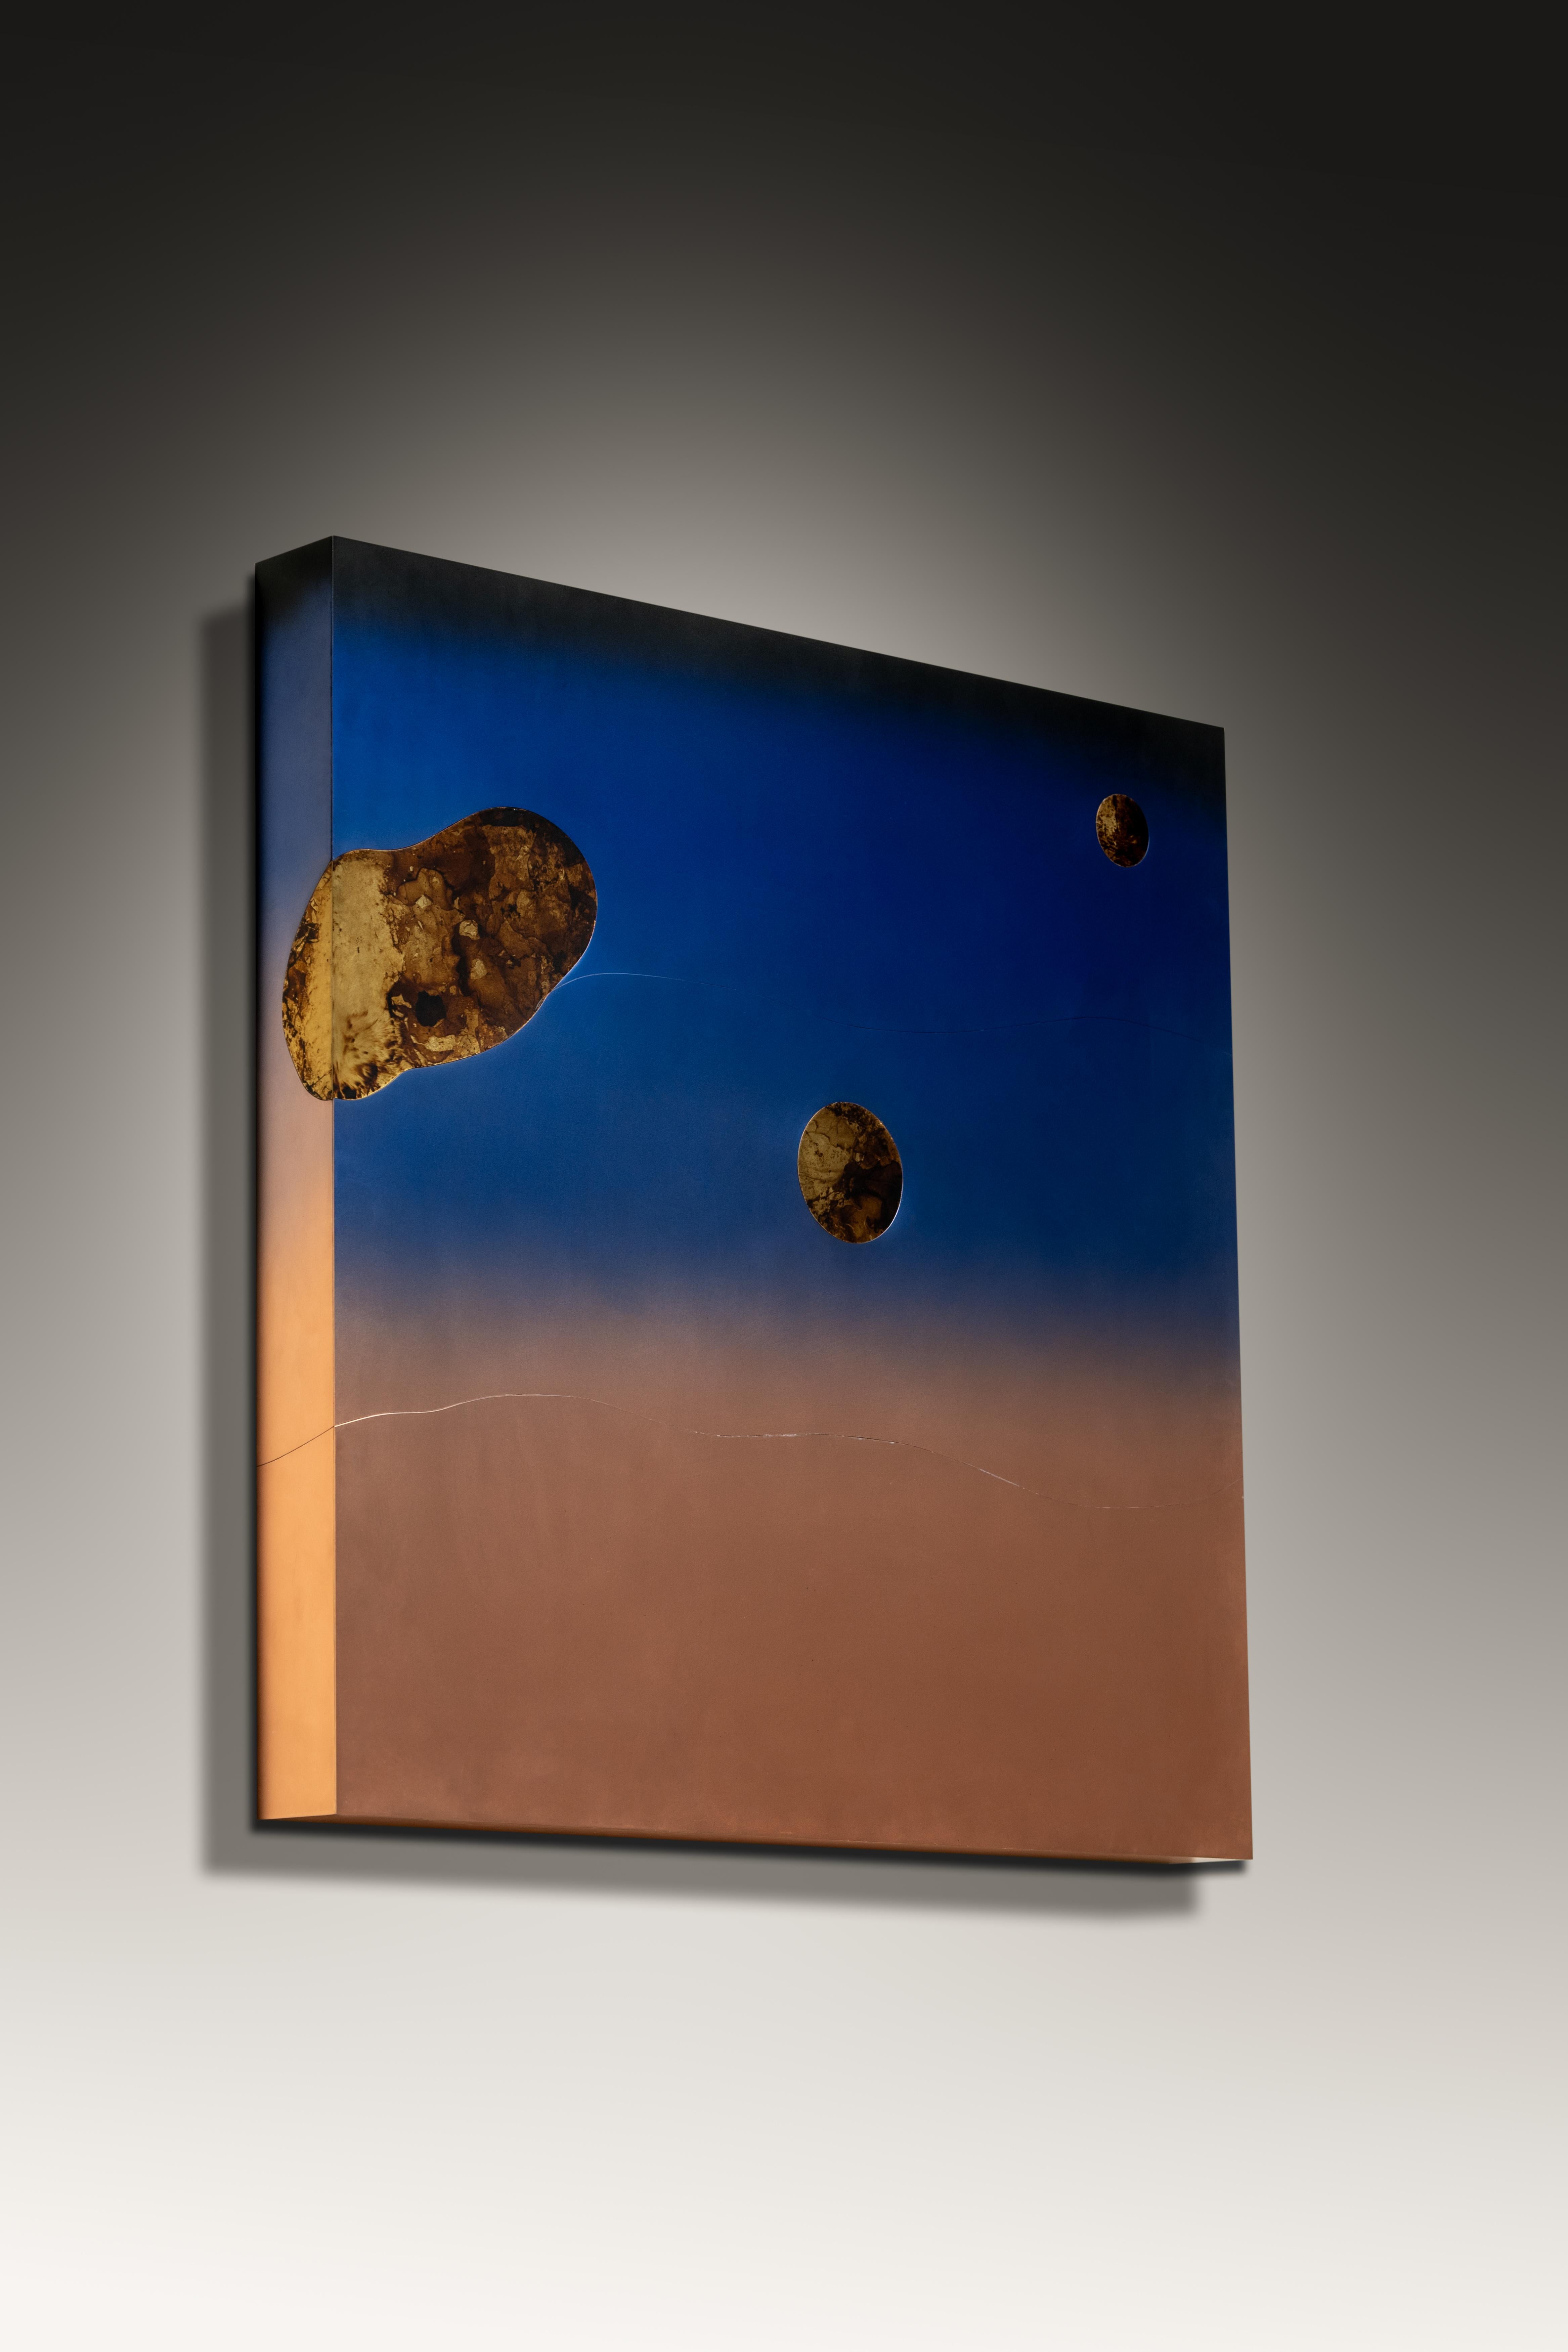 Celestial beings on a calm sea of the universe awakens peace and wellbeing in one's consciousness. Celestial Wall Art II is achieved with gentle contrasts in organic textures and colours of brass and copper. Art for the soul.
The wall art is made